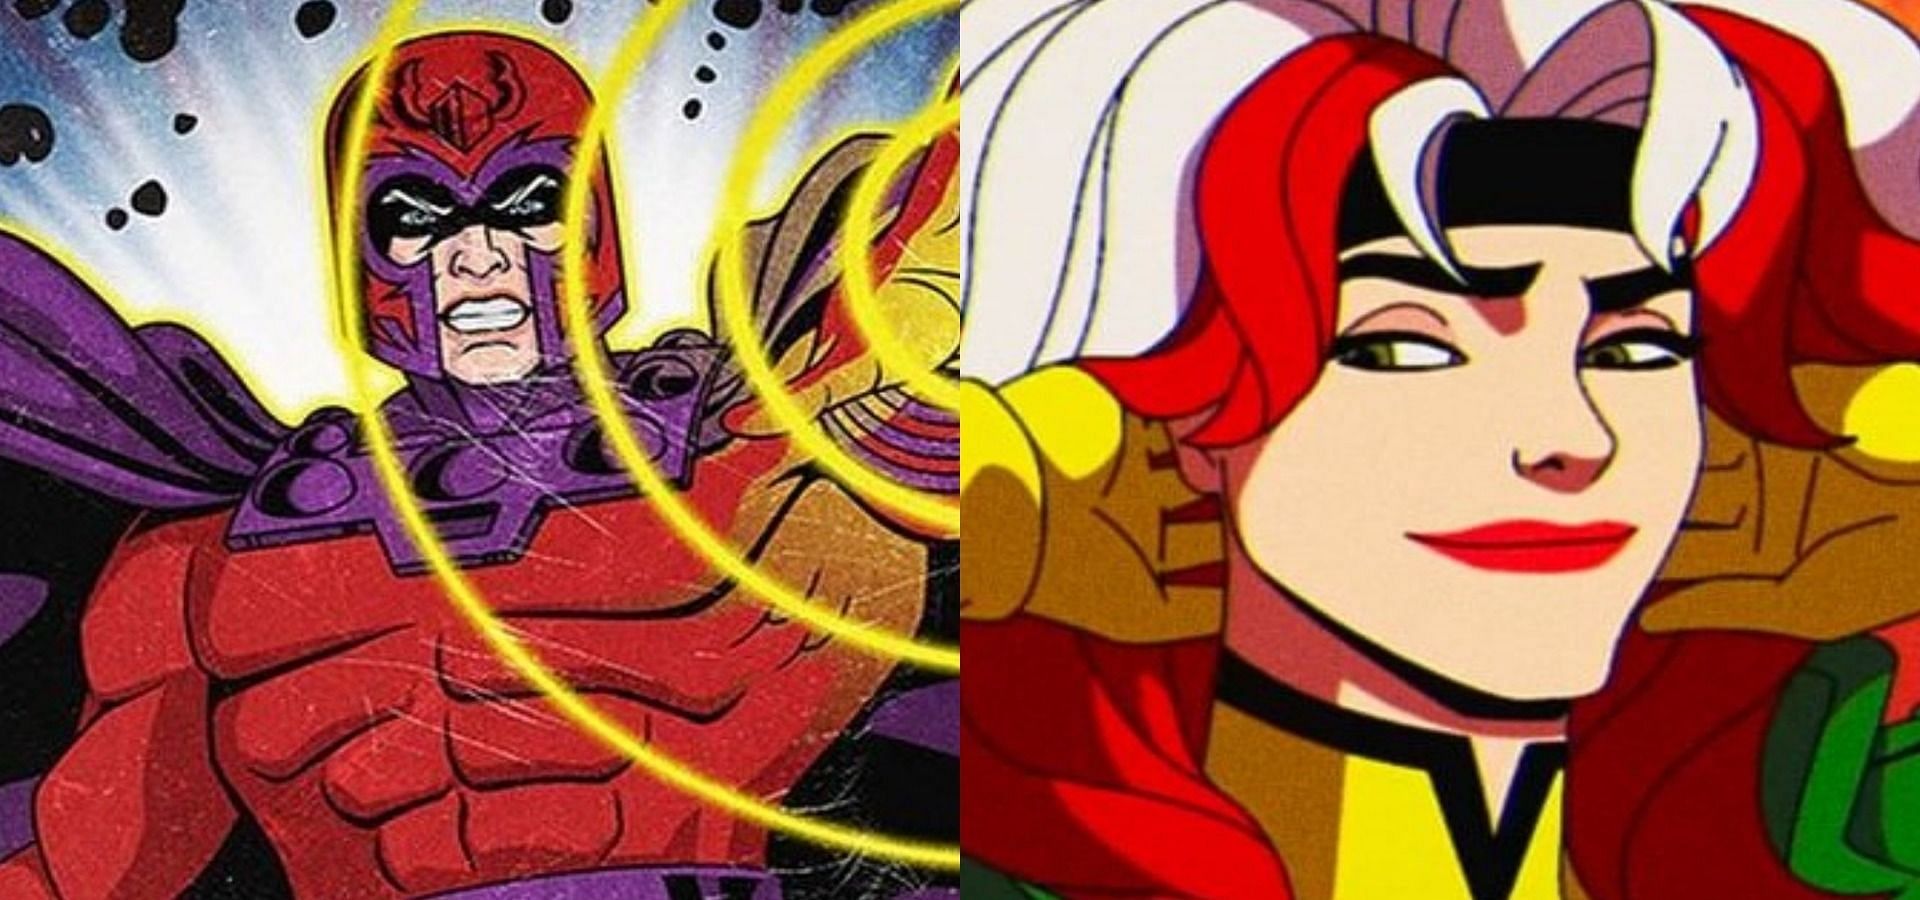 Relationship between Rogue and Magneto (Image via animatedtimes@Instagram and mjwaterson@Instagram)